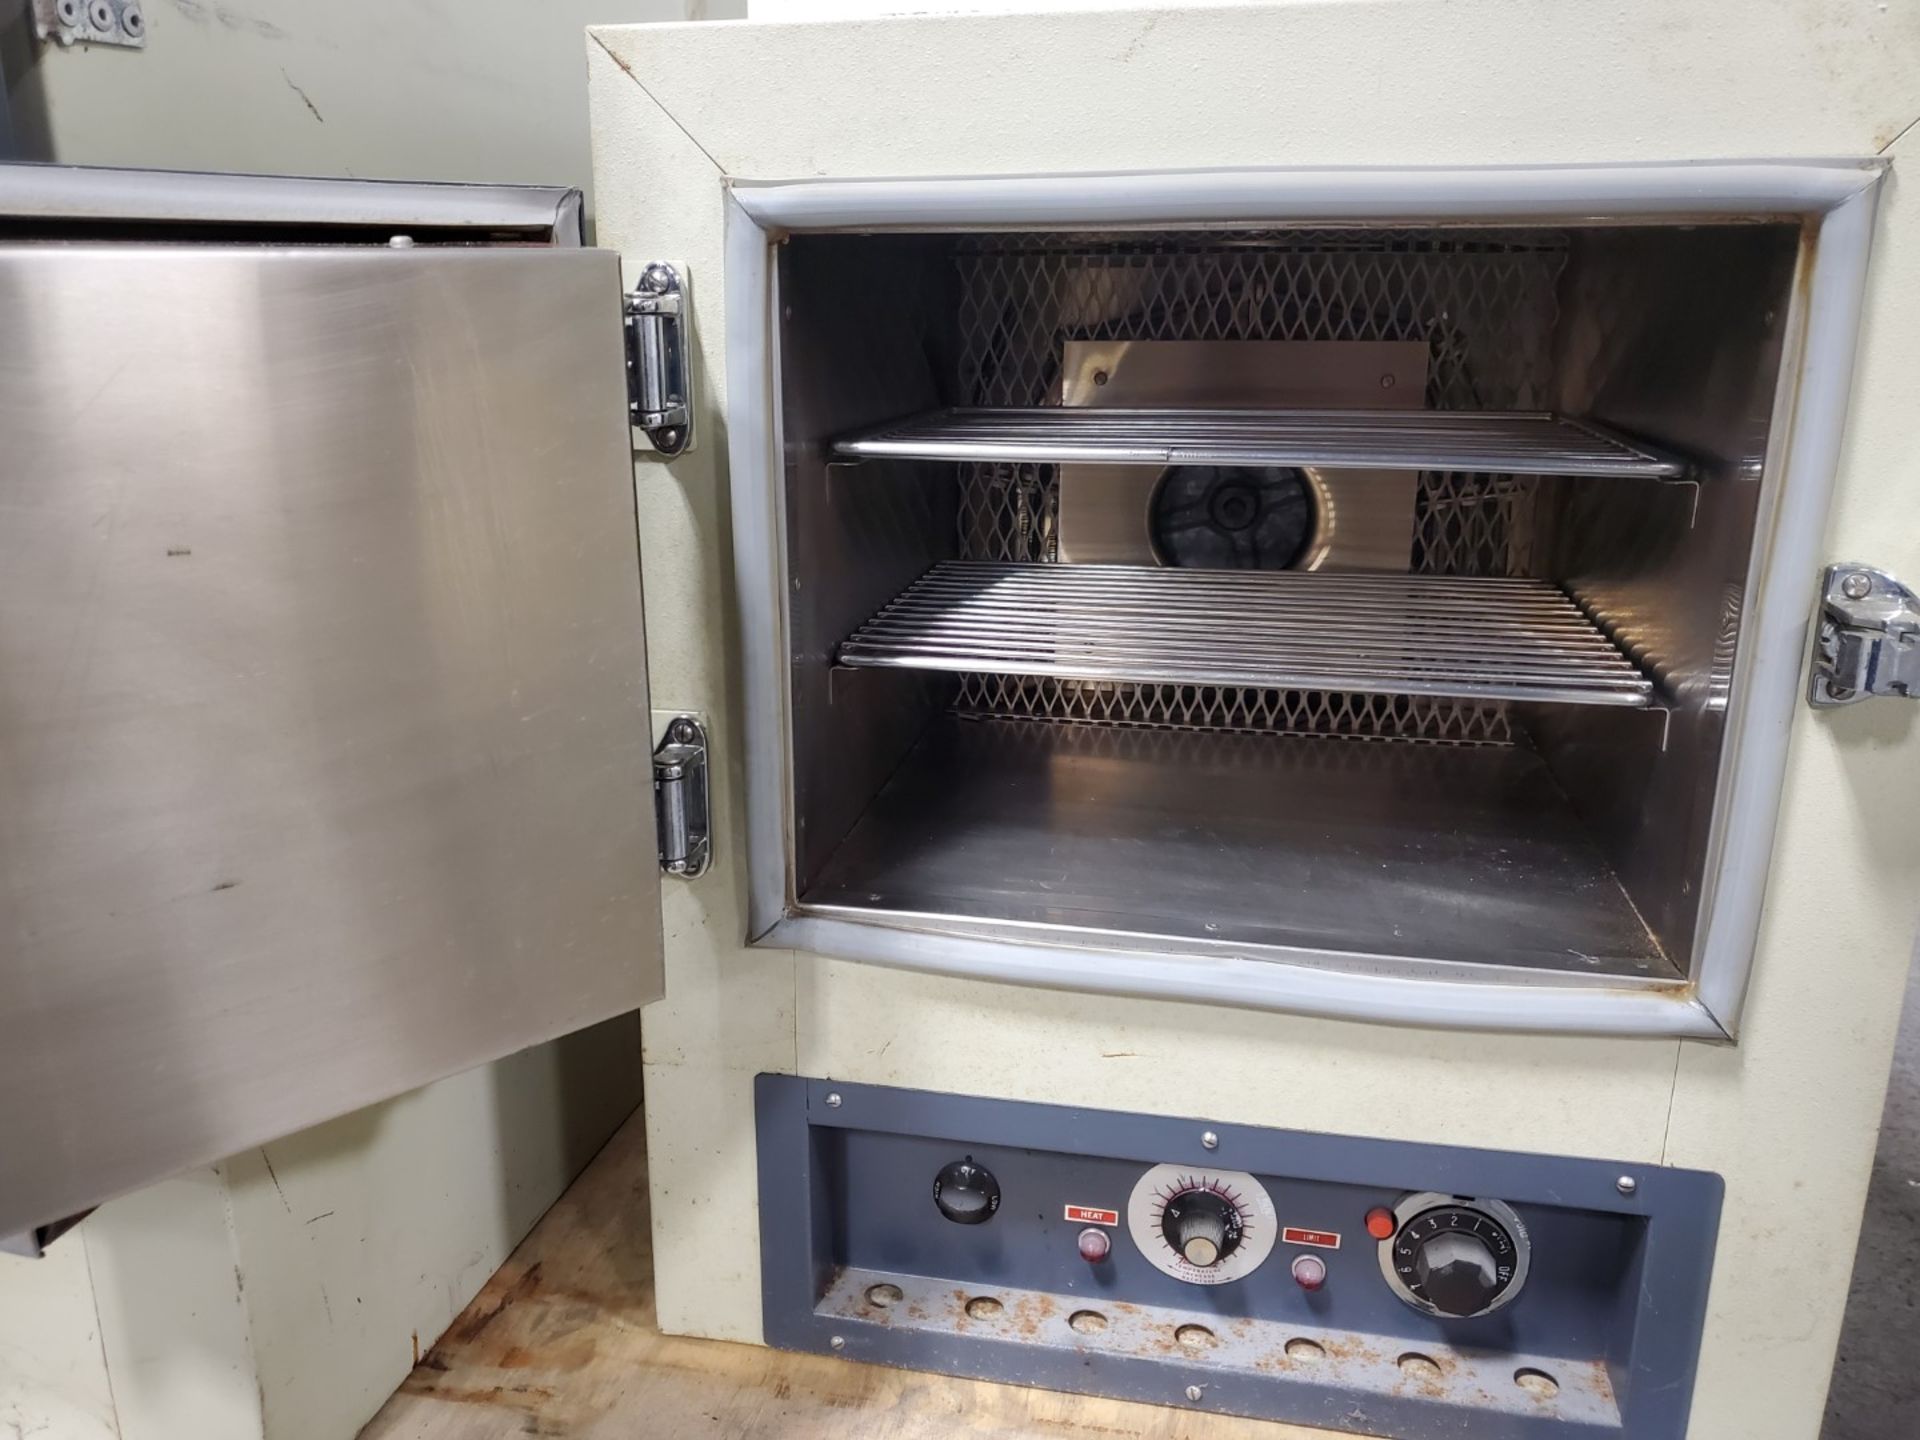 Hotpack Convection Oven, Model 213030 - Image 5 of 5